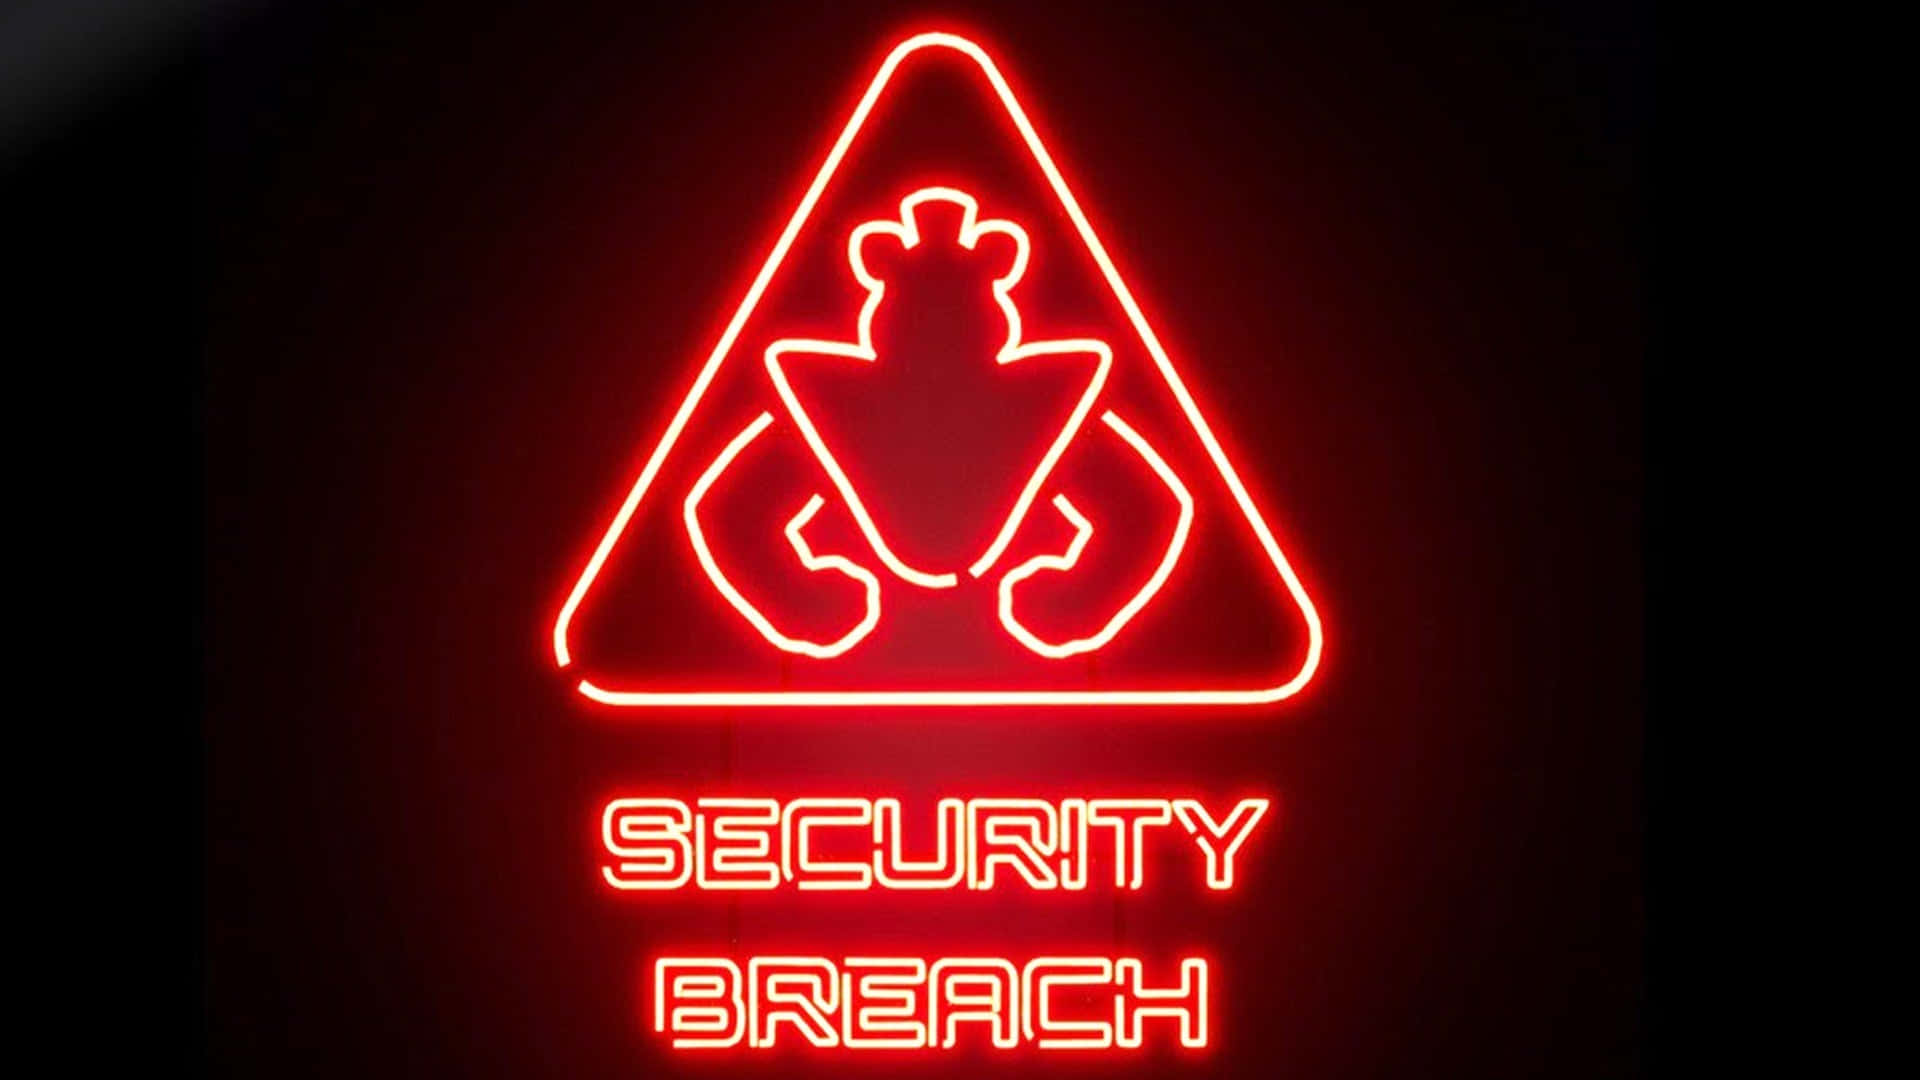 FNAF Security Breach Wallpapers Discover more Five Nights at Freddys FNAF  Security Breach Freddy Game Security Breach wallp  Fnaf Fnaf  wallpapers Fnaf song